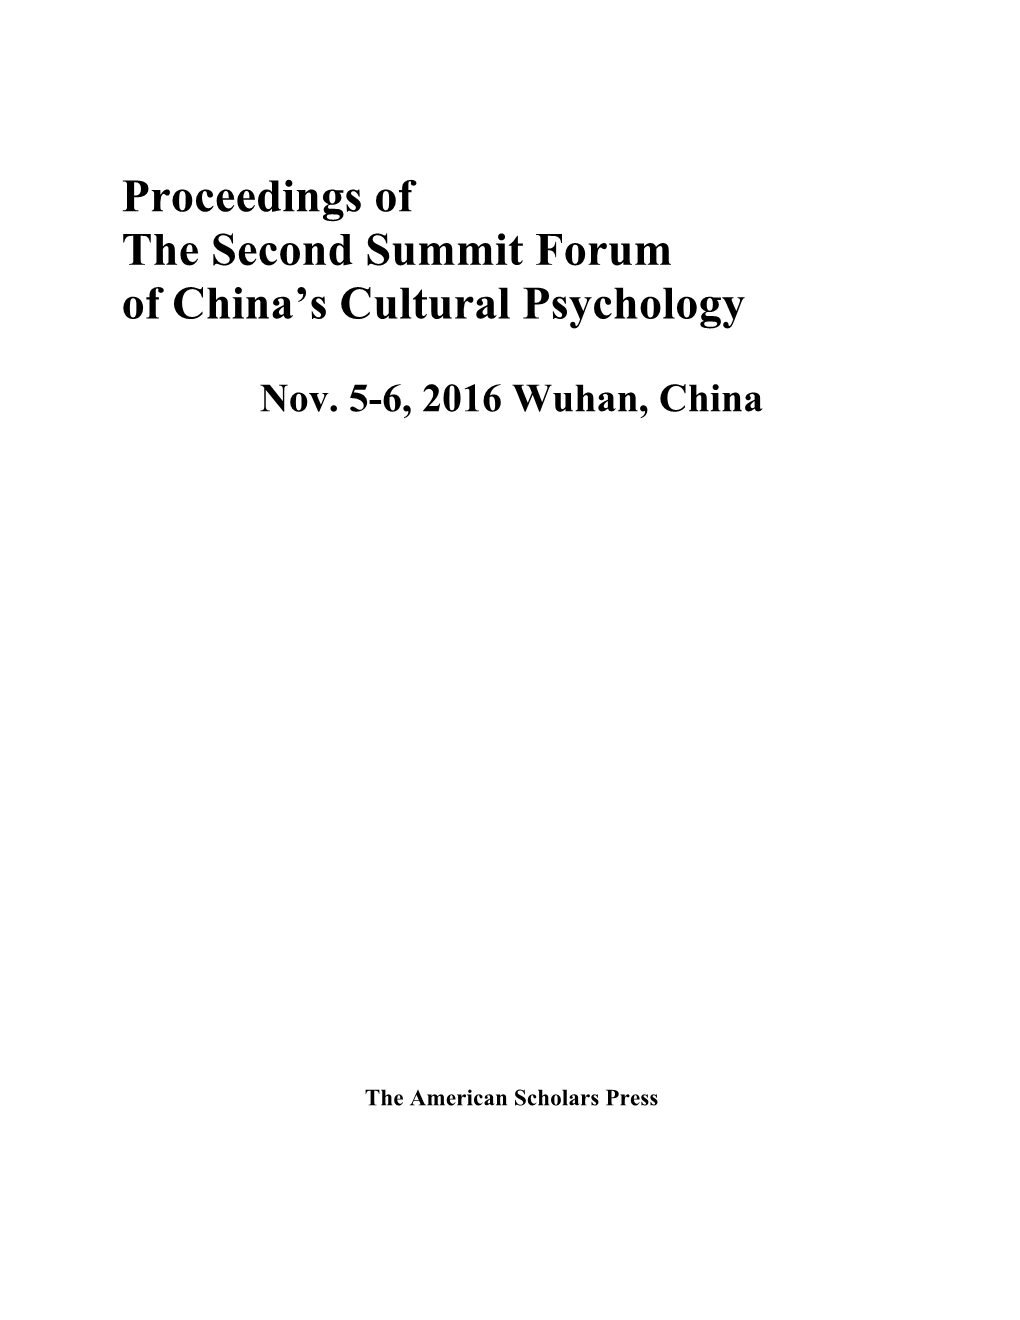 Proceedings of the Second Summit Forum of China's Cultural Psychology